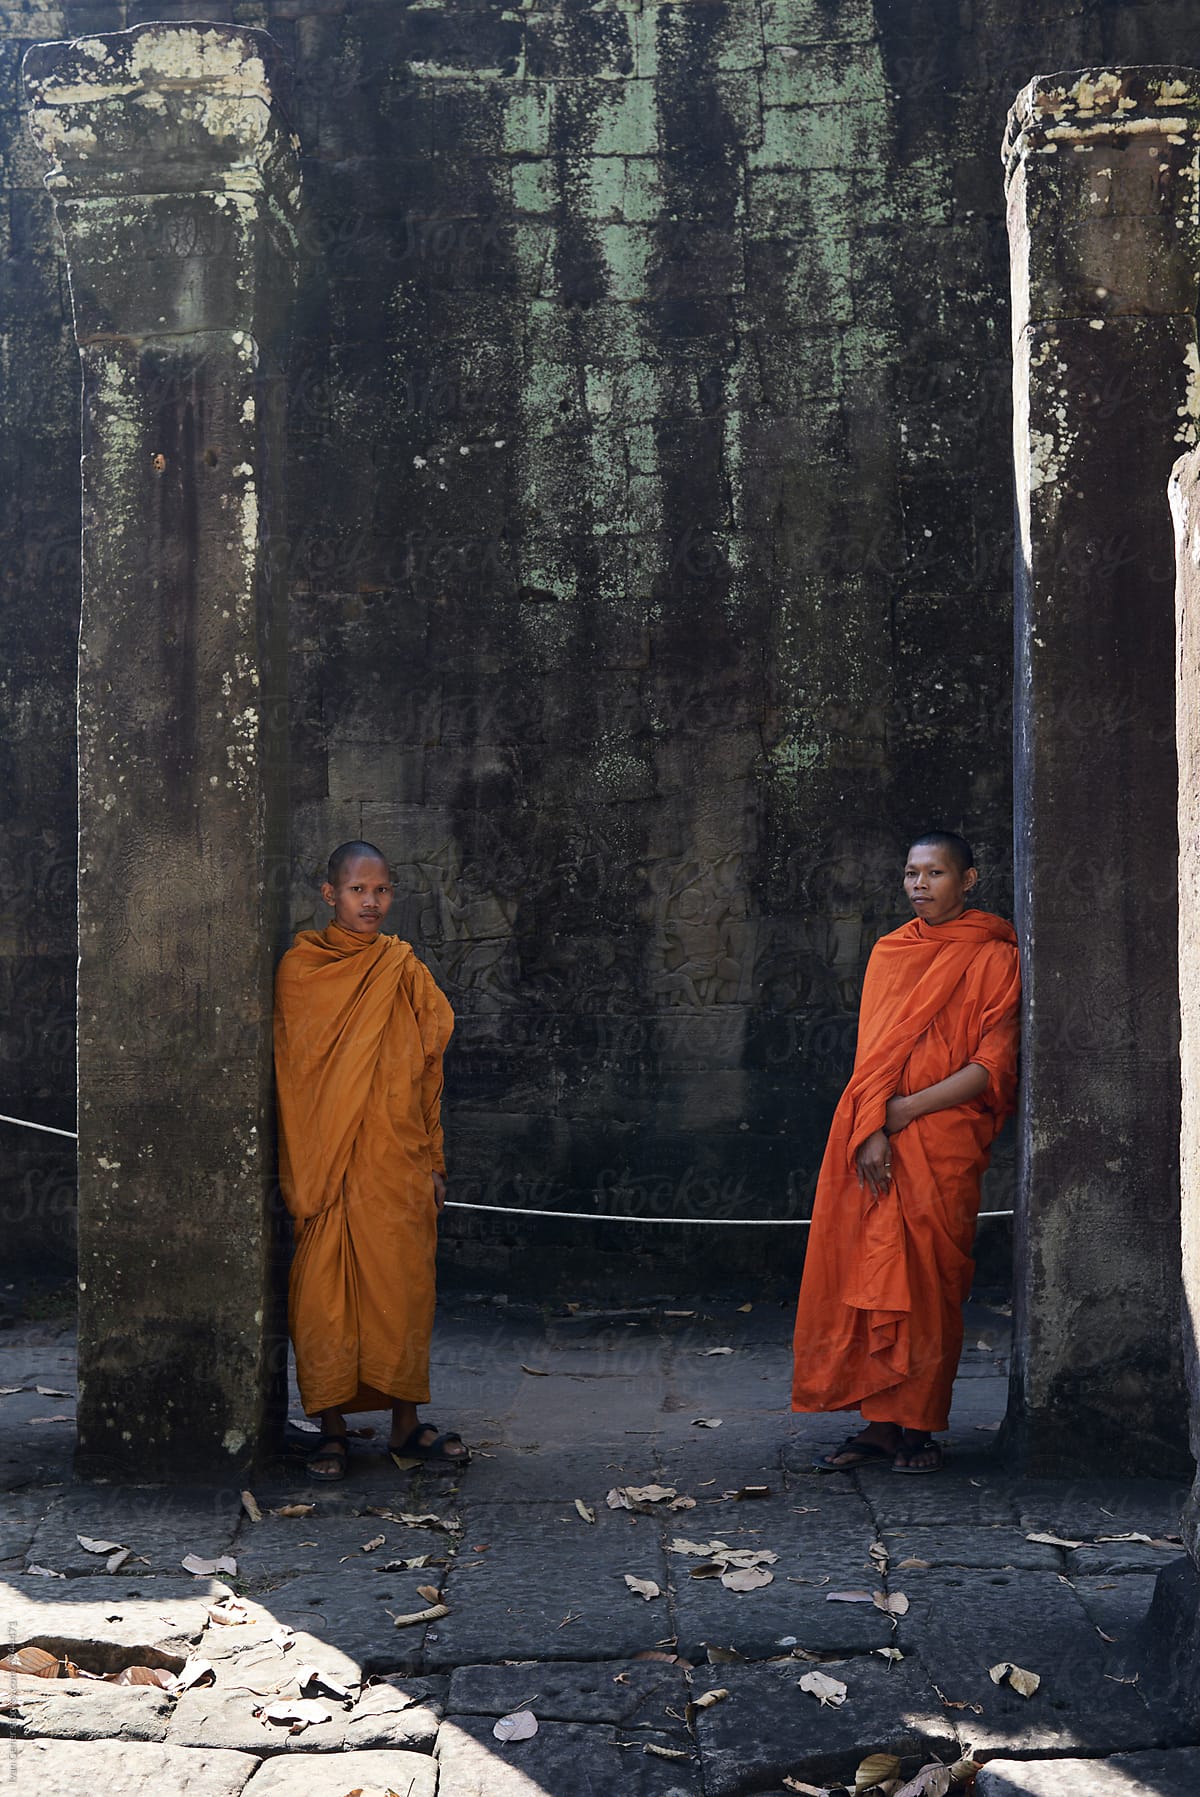 Monks in orange clothes standing